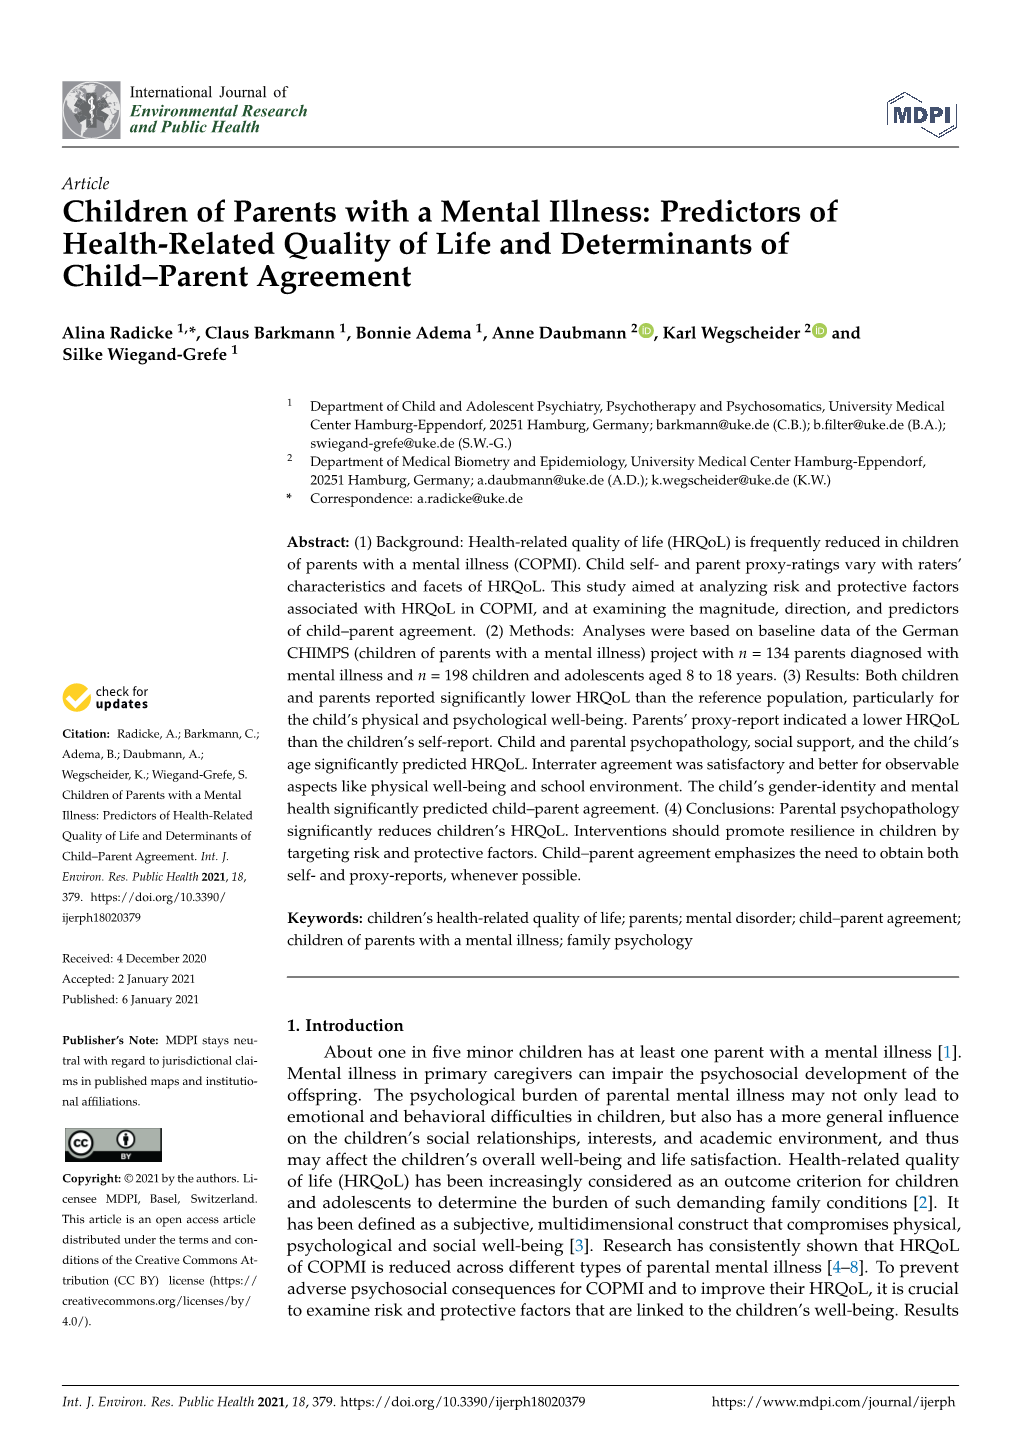 Children of Parents with a Mental Illness: Predictors of Health-Related Quality of Life and Determinants of Child–Parent Agreement